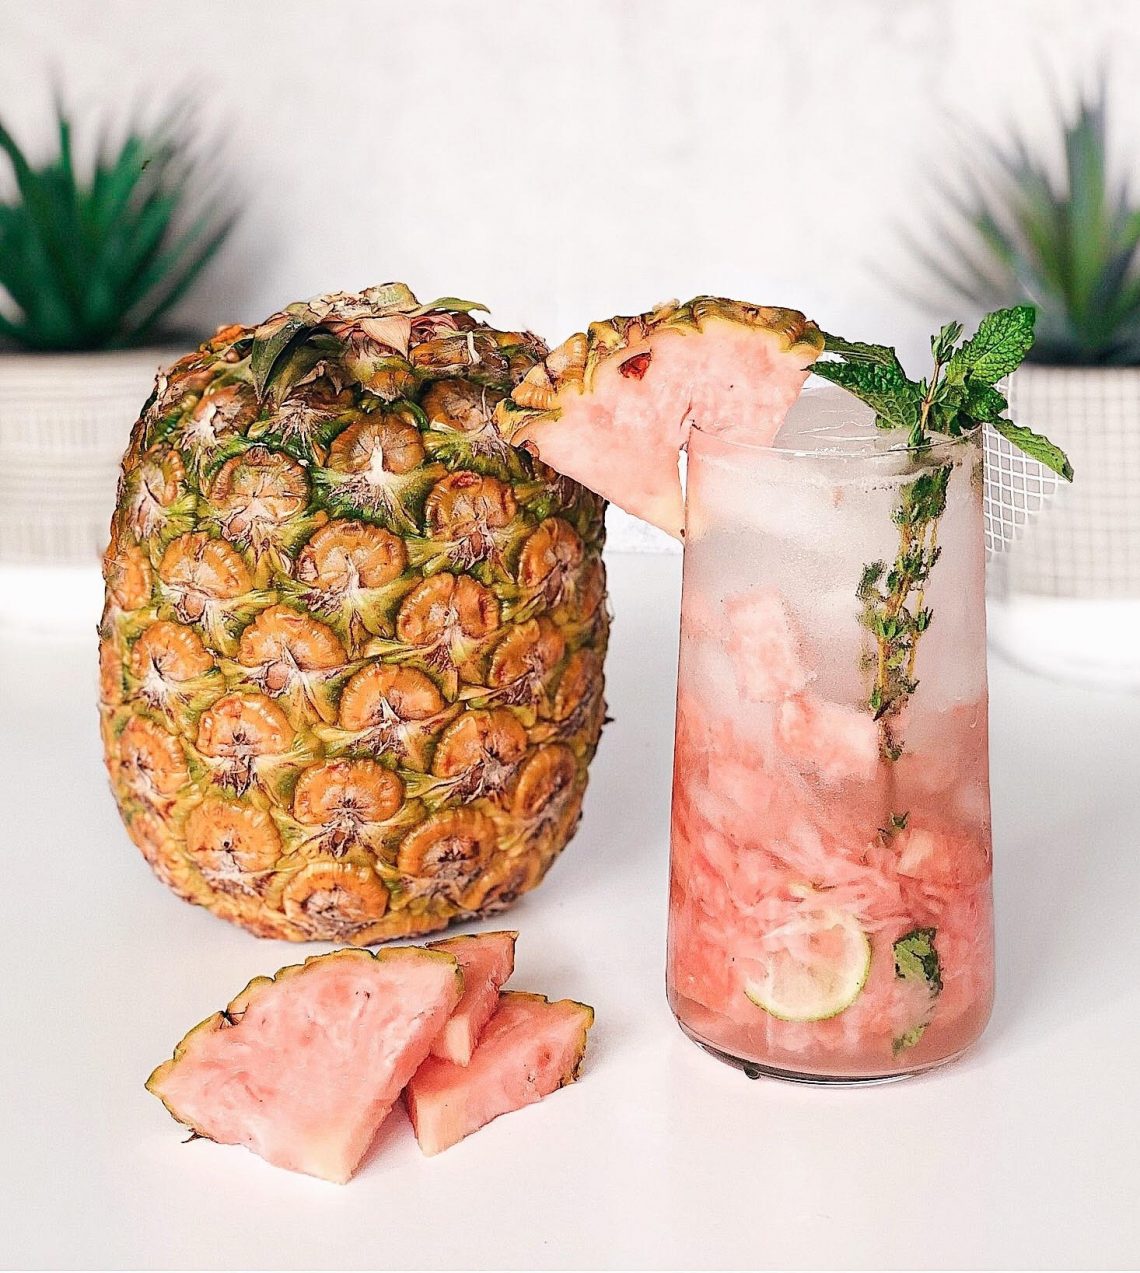 Get Creative With The Pink Pineapple